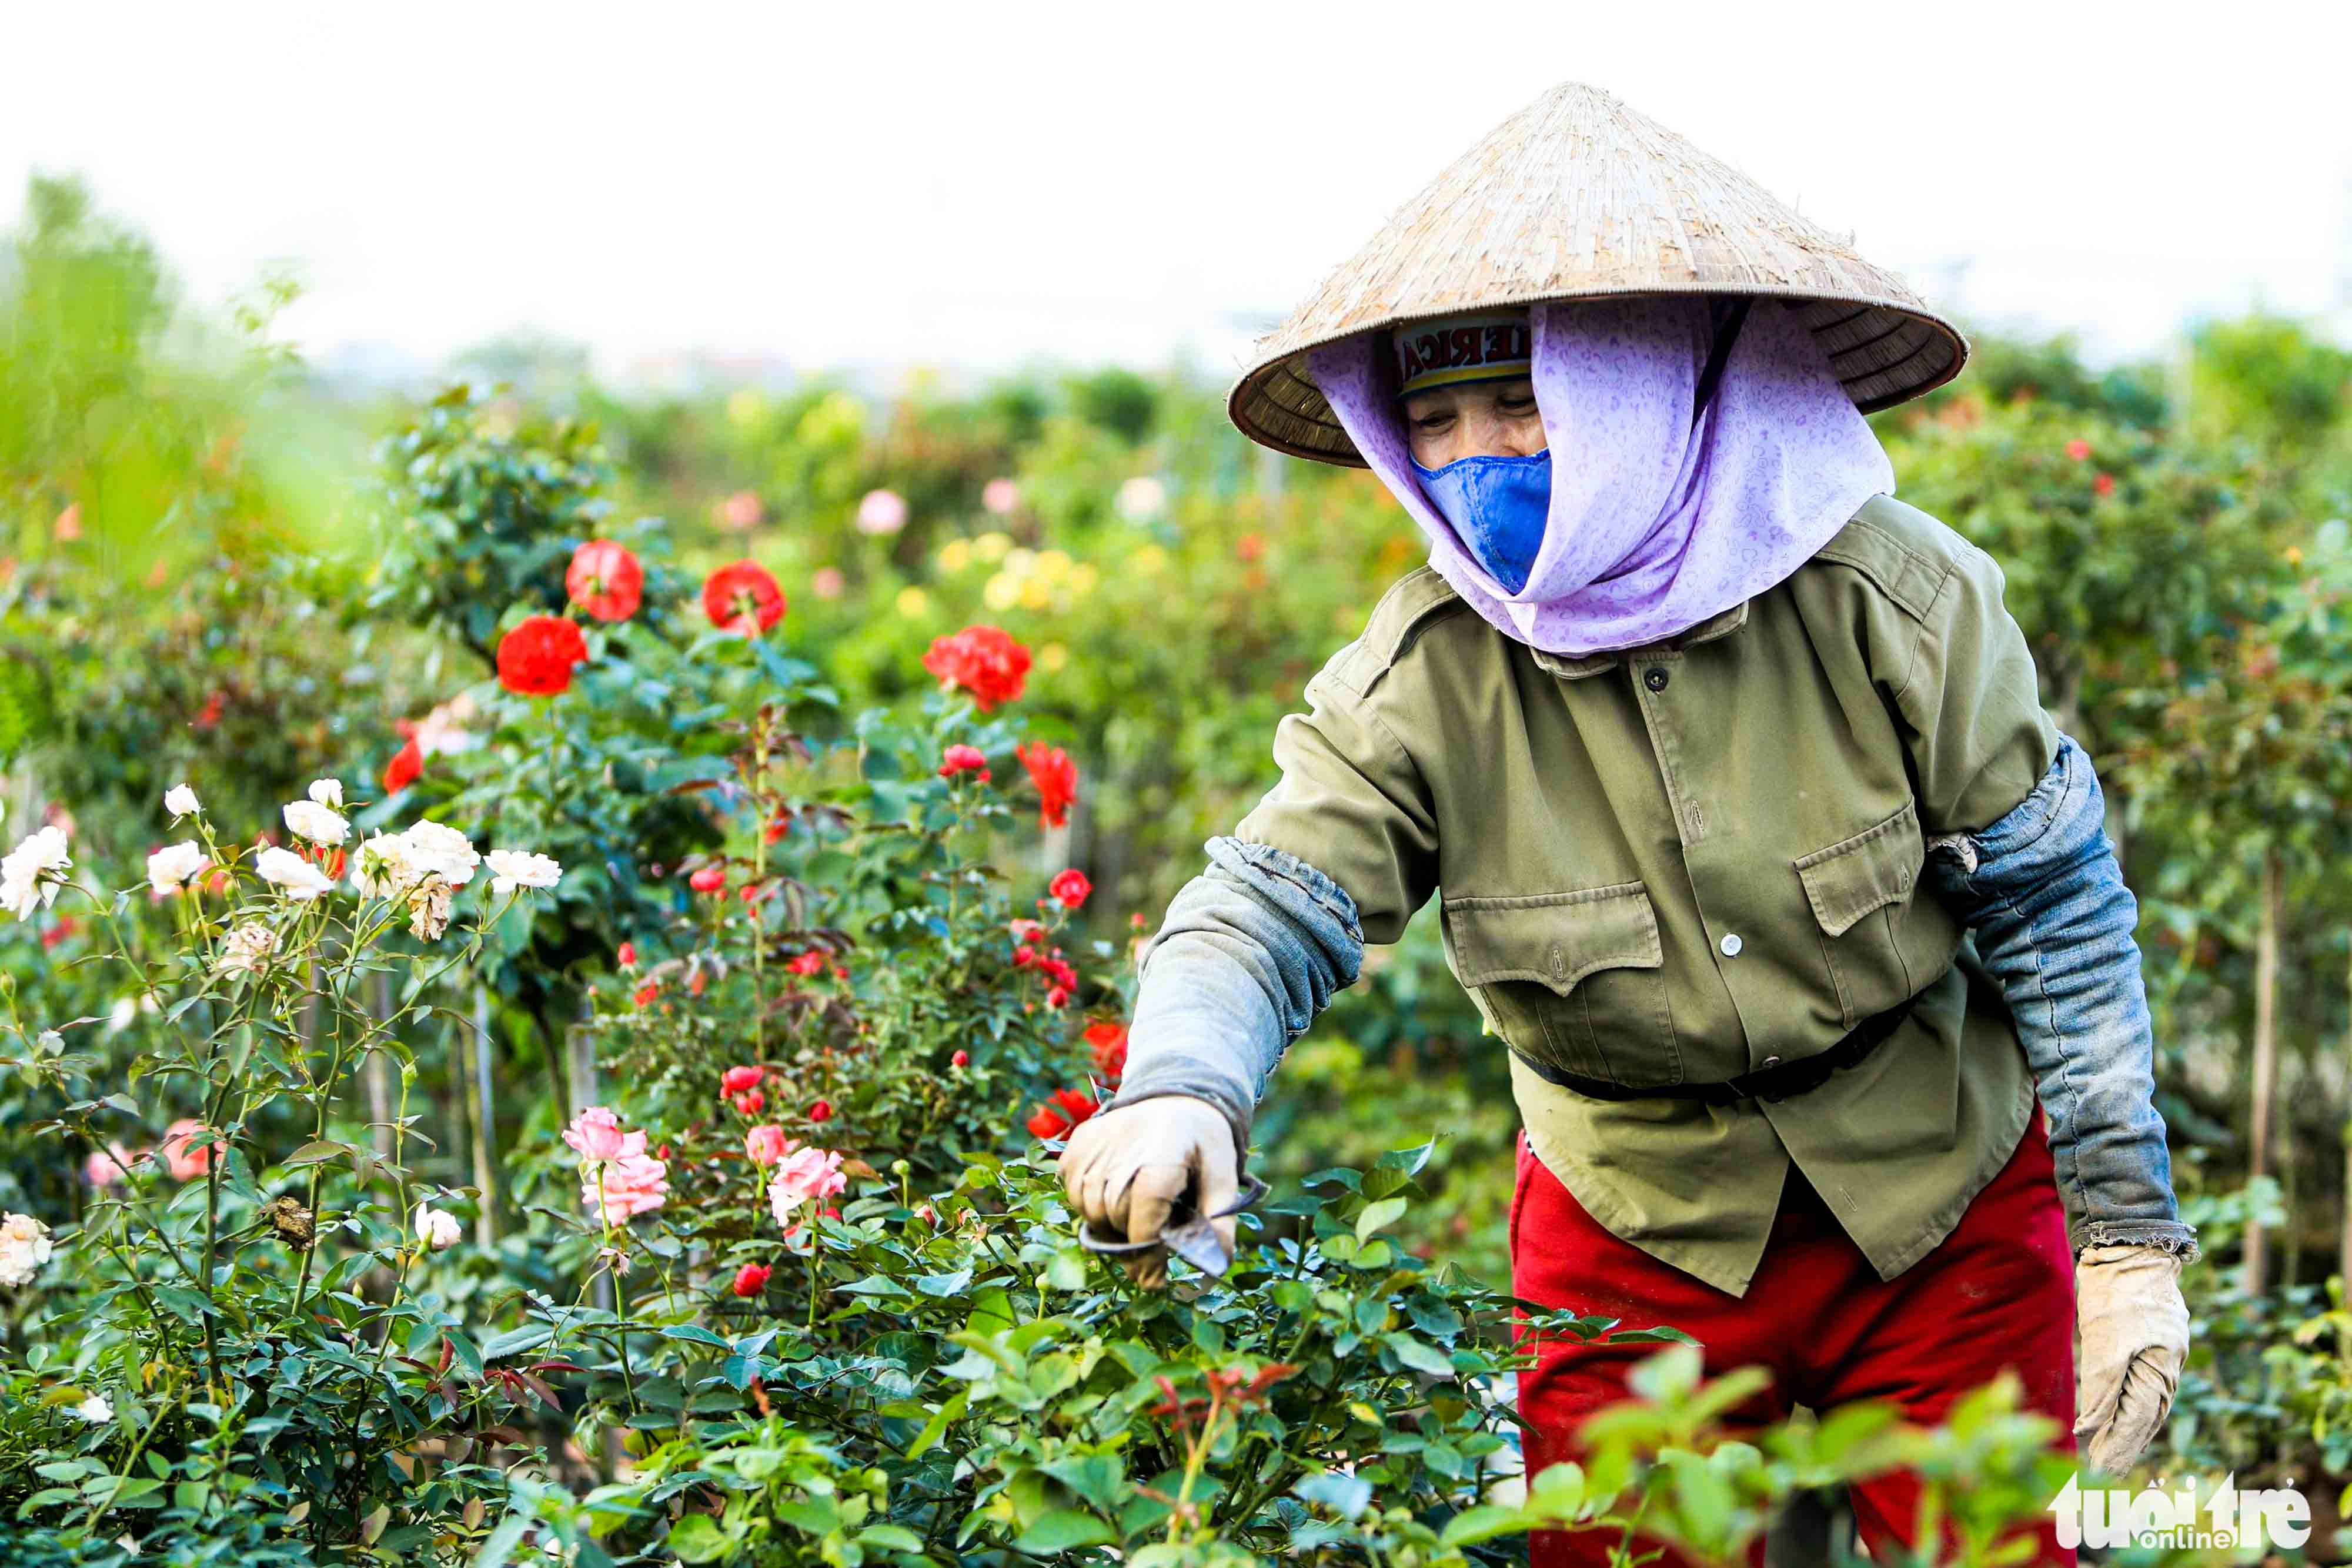 Nguyen Thi Tam works in her rose field at Me Linh flower village in Me Linh District, Hanoi. Photo: Danh Khang / Tuoi Tre